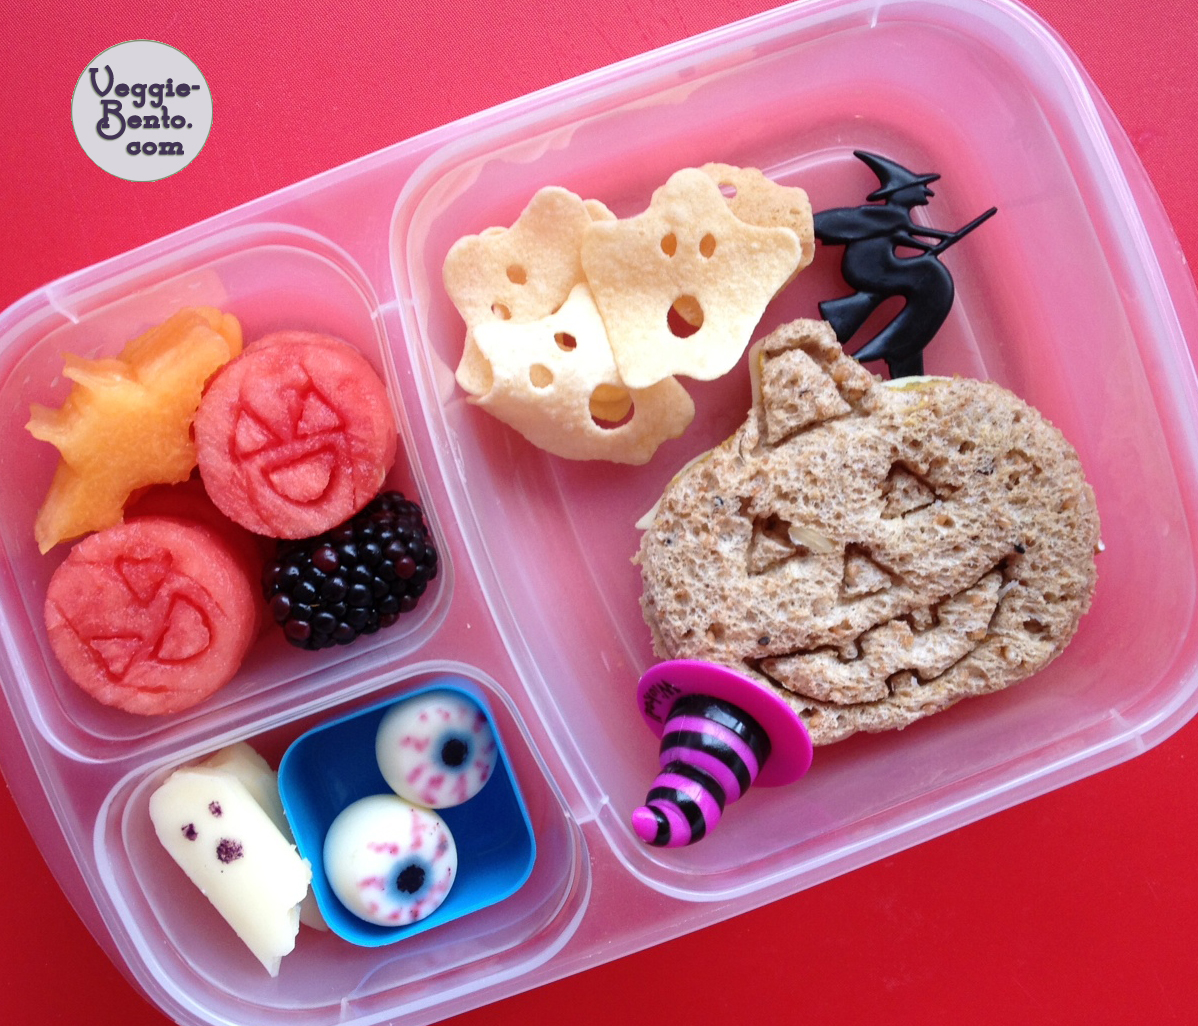 Mamabelly's Lunches With Love: Easy Lunch Ideas in Easylunchboxes